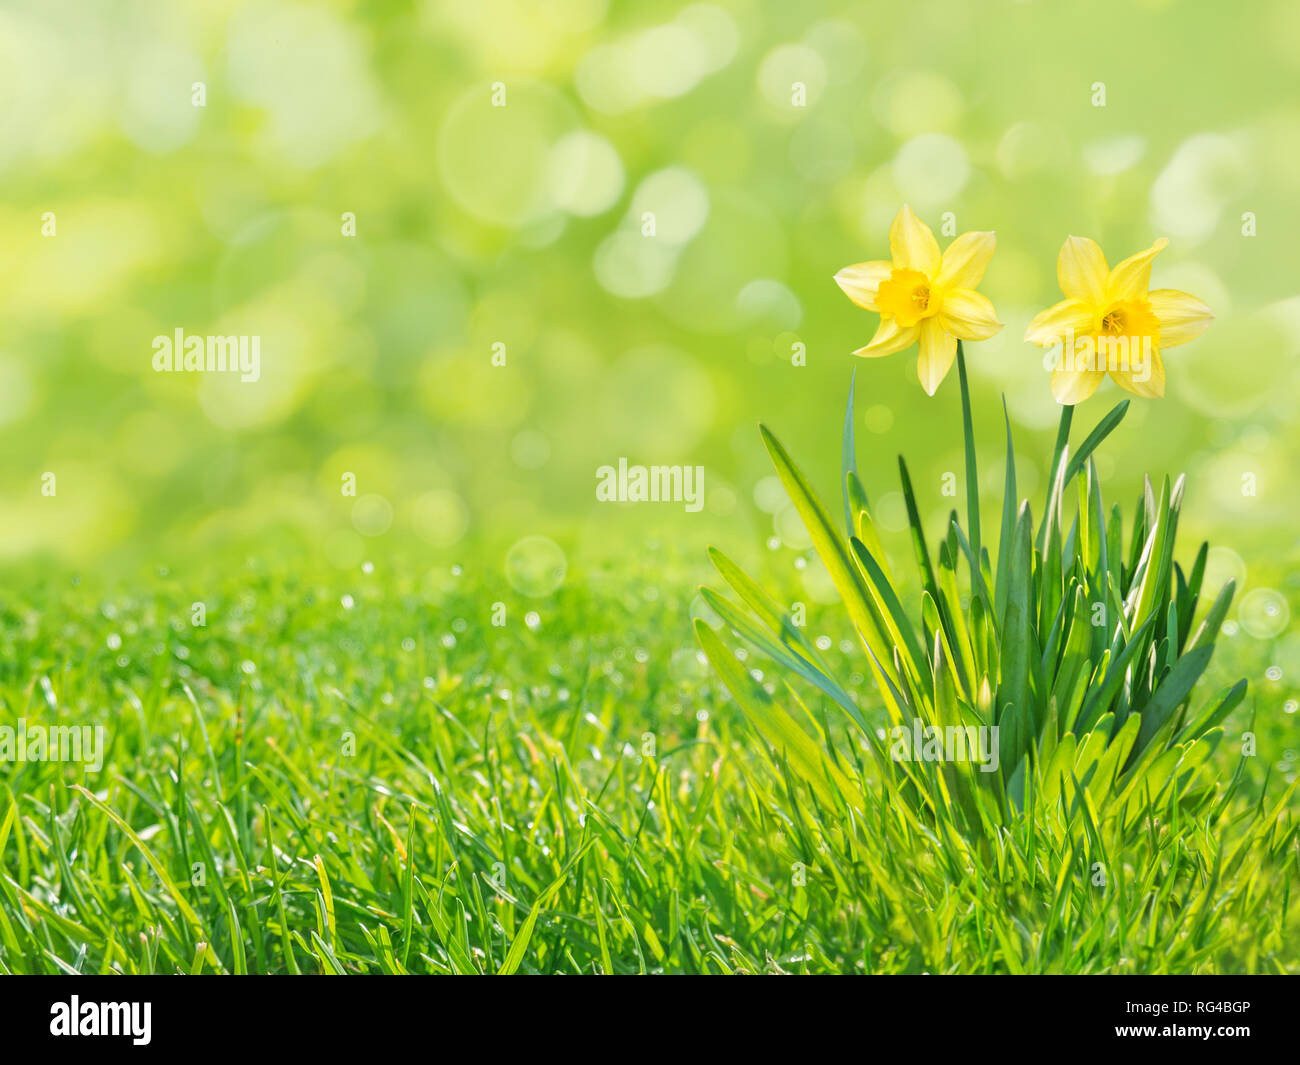 Two yellow daffodil flowers with leaves on the fresh green grass lawn spring blurred background Stock Photo